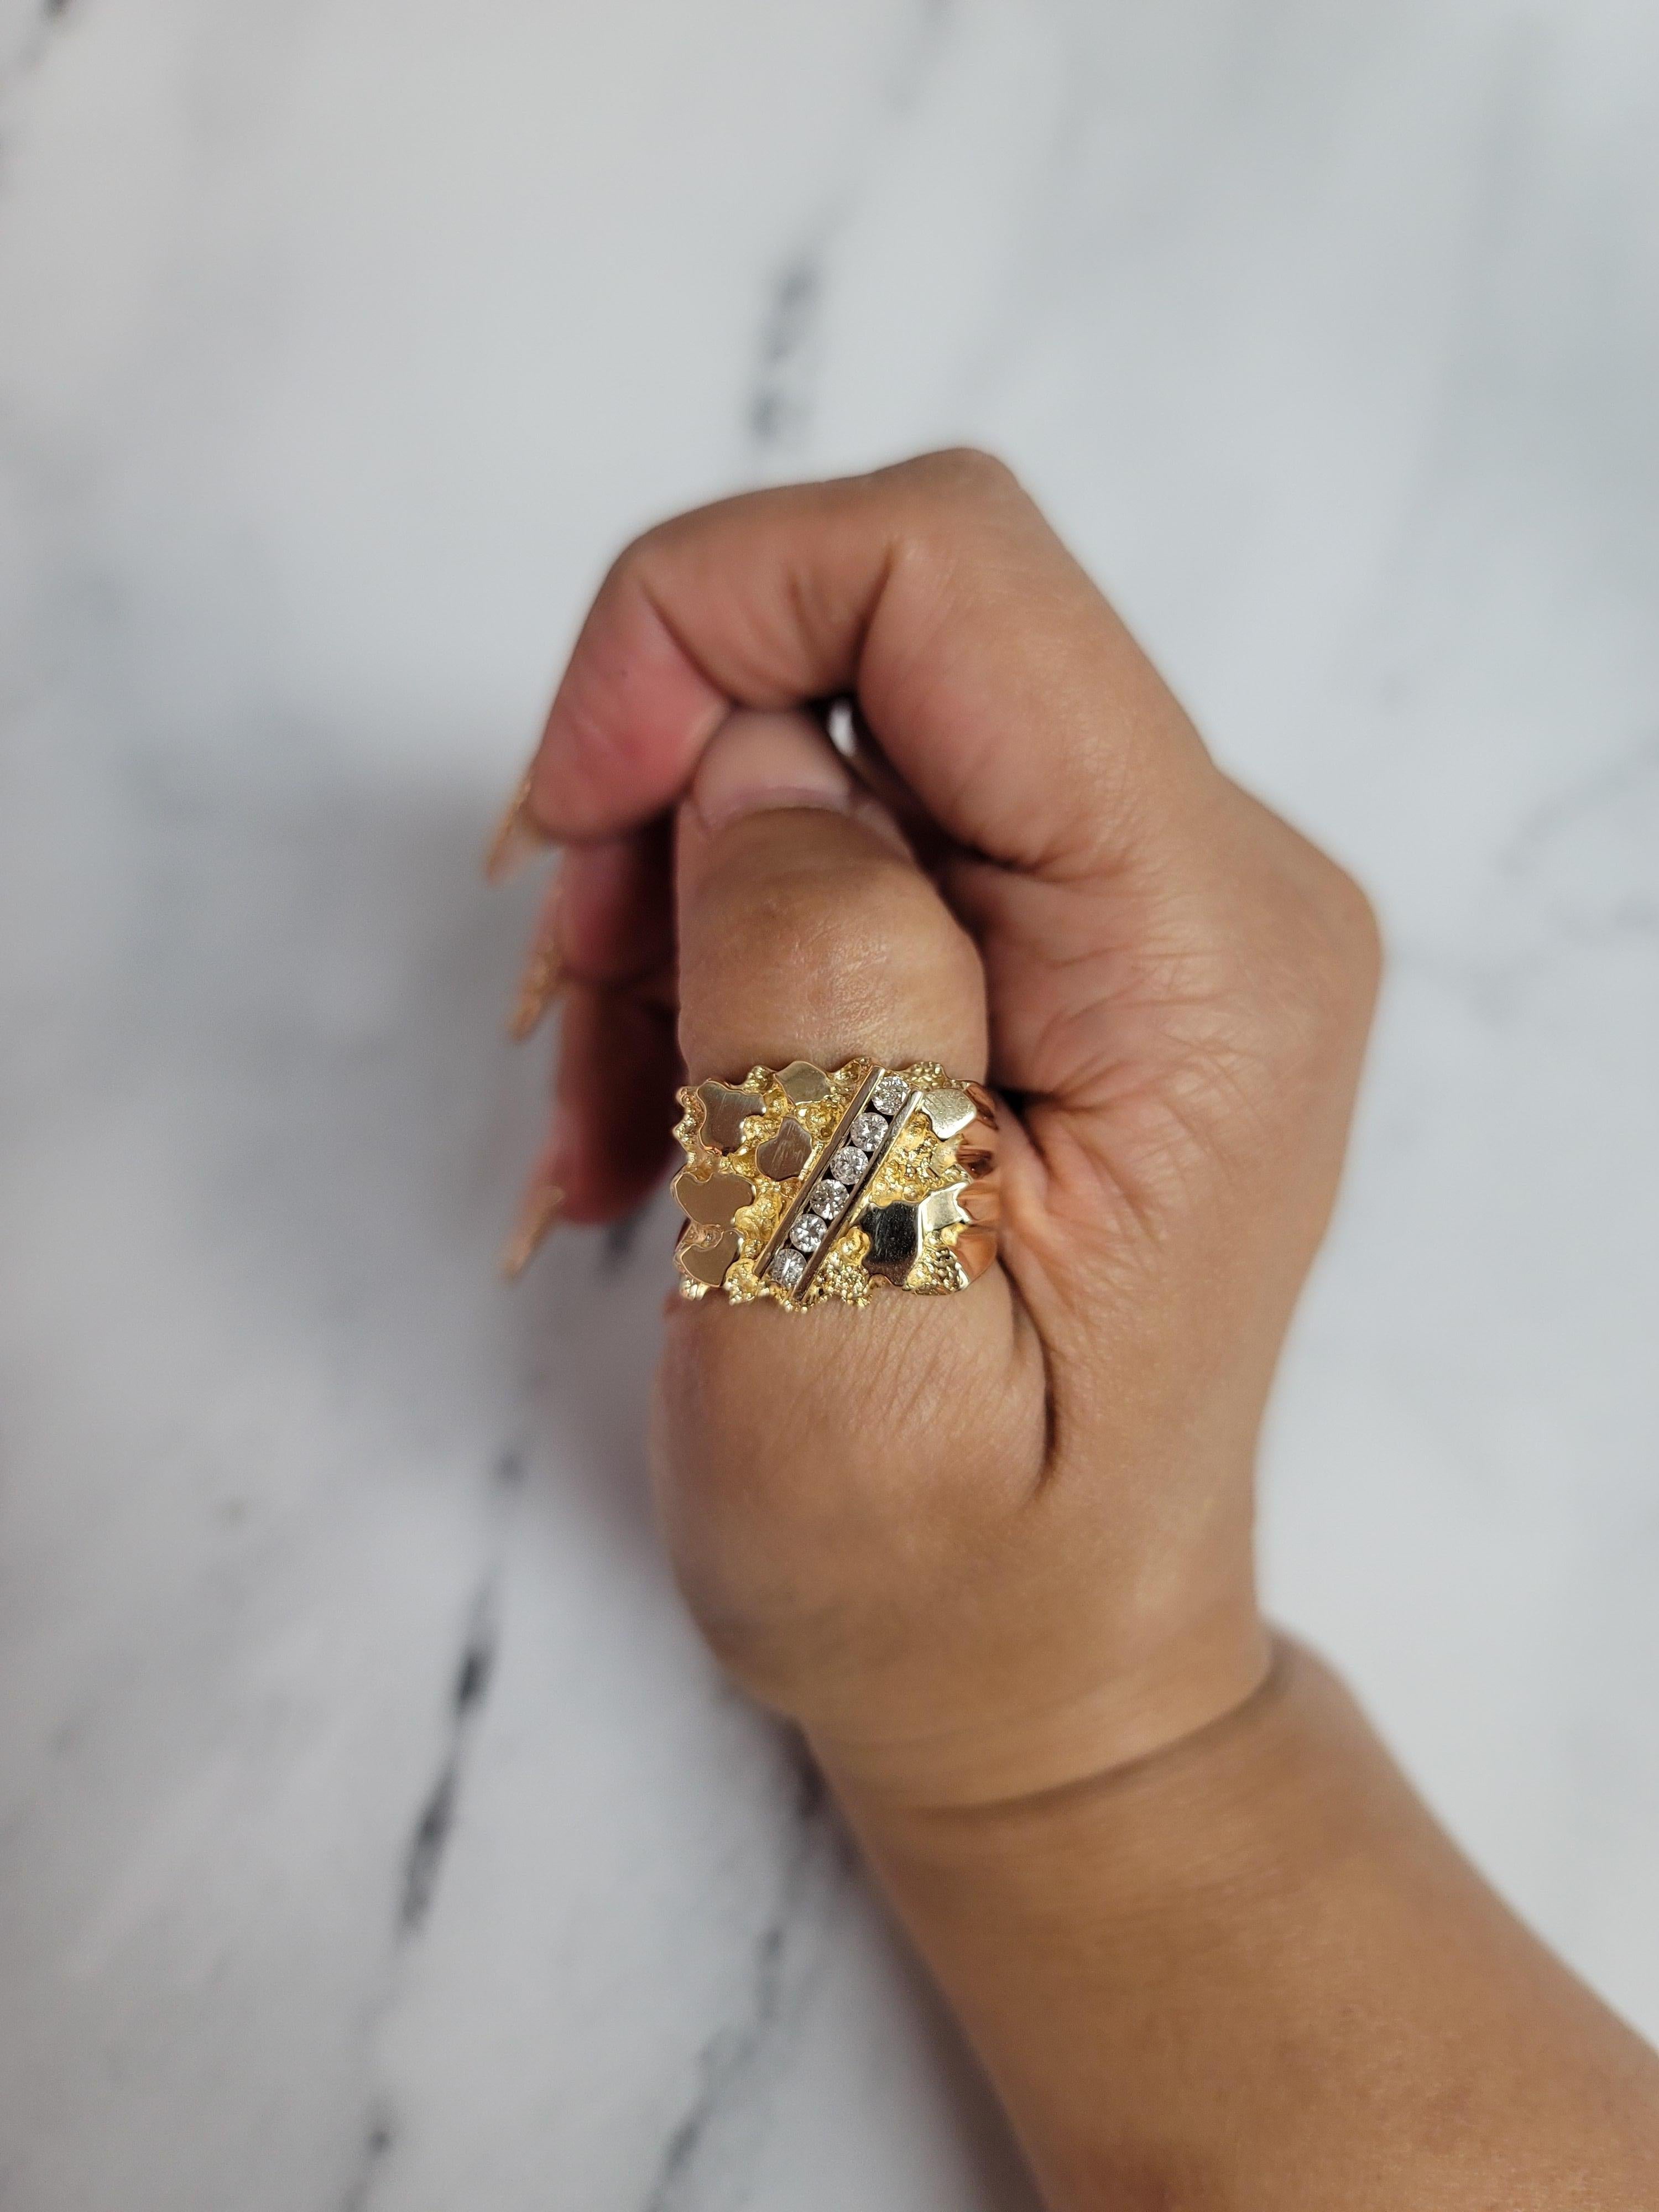 ♥ Product Summary ♥

Main Stone: Diamond 
Approx. Diamond Carat Weight: .37cttw 
Diamond Color: H/I
Diamond Clarity: SI1/SI2
Dimensions: 16mm x 21mm
Band Material: 14k Yellow Gold
Number of Stones: 6 
Weight: 16 grams 